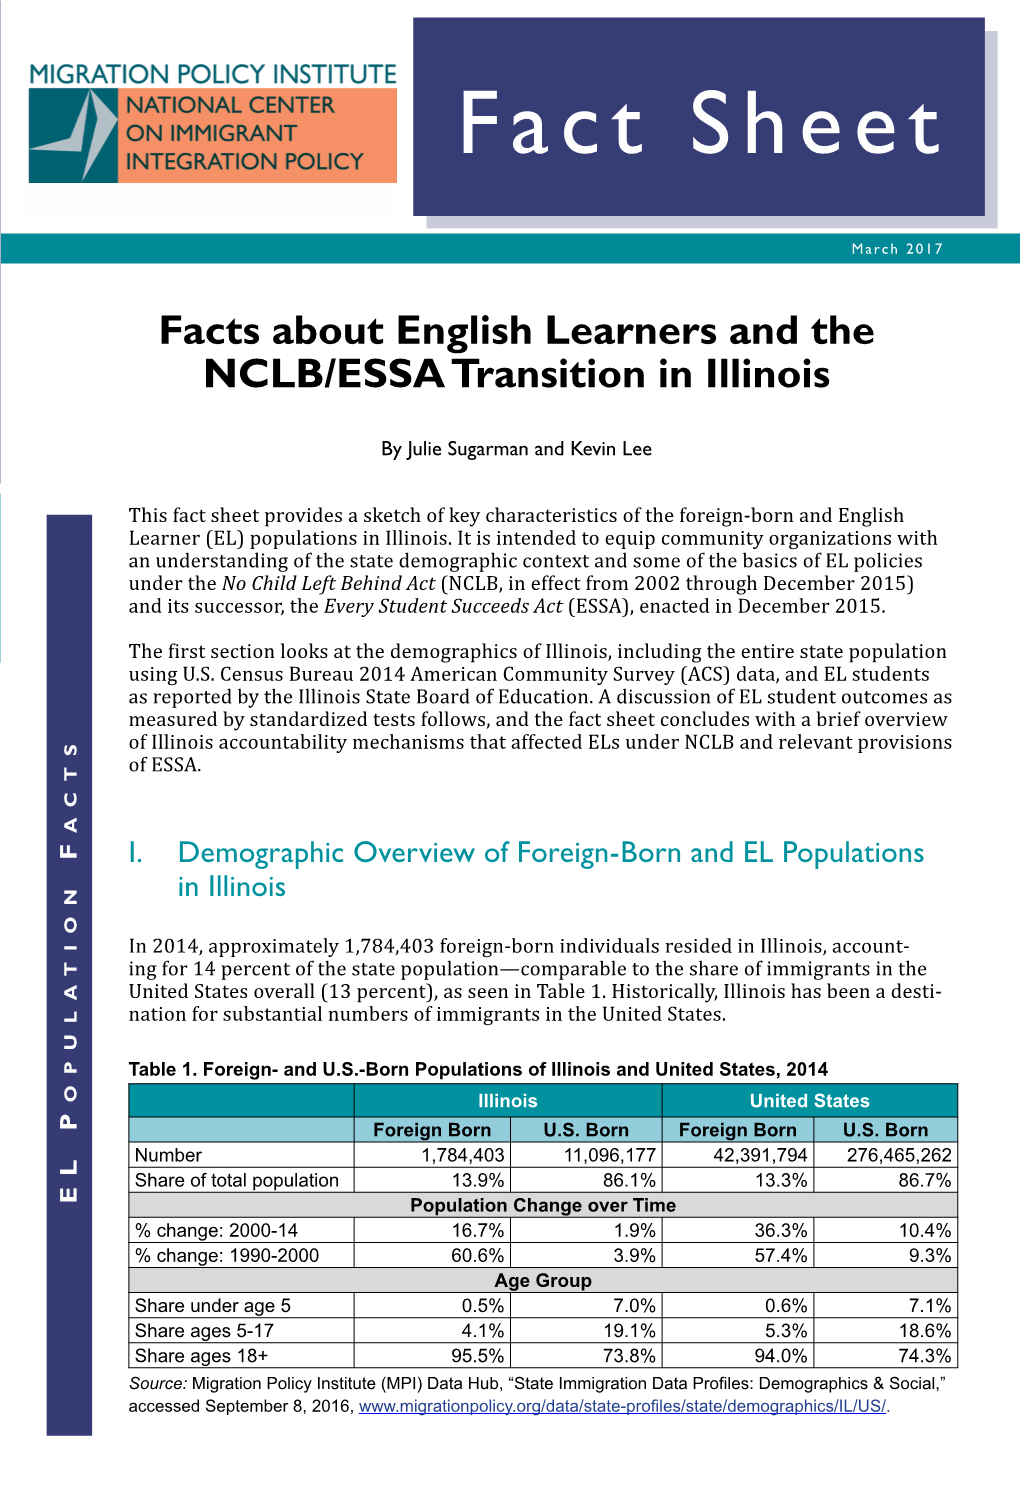 Facts About English Learners and the NCLB/ESSA Transition in Illinois